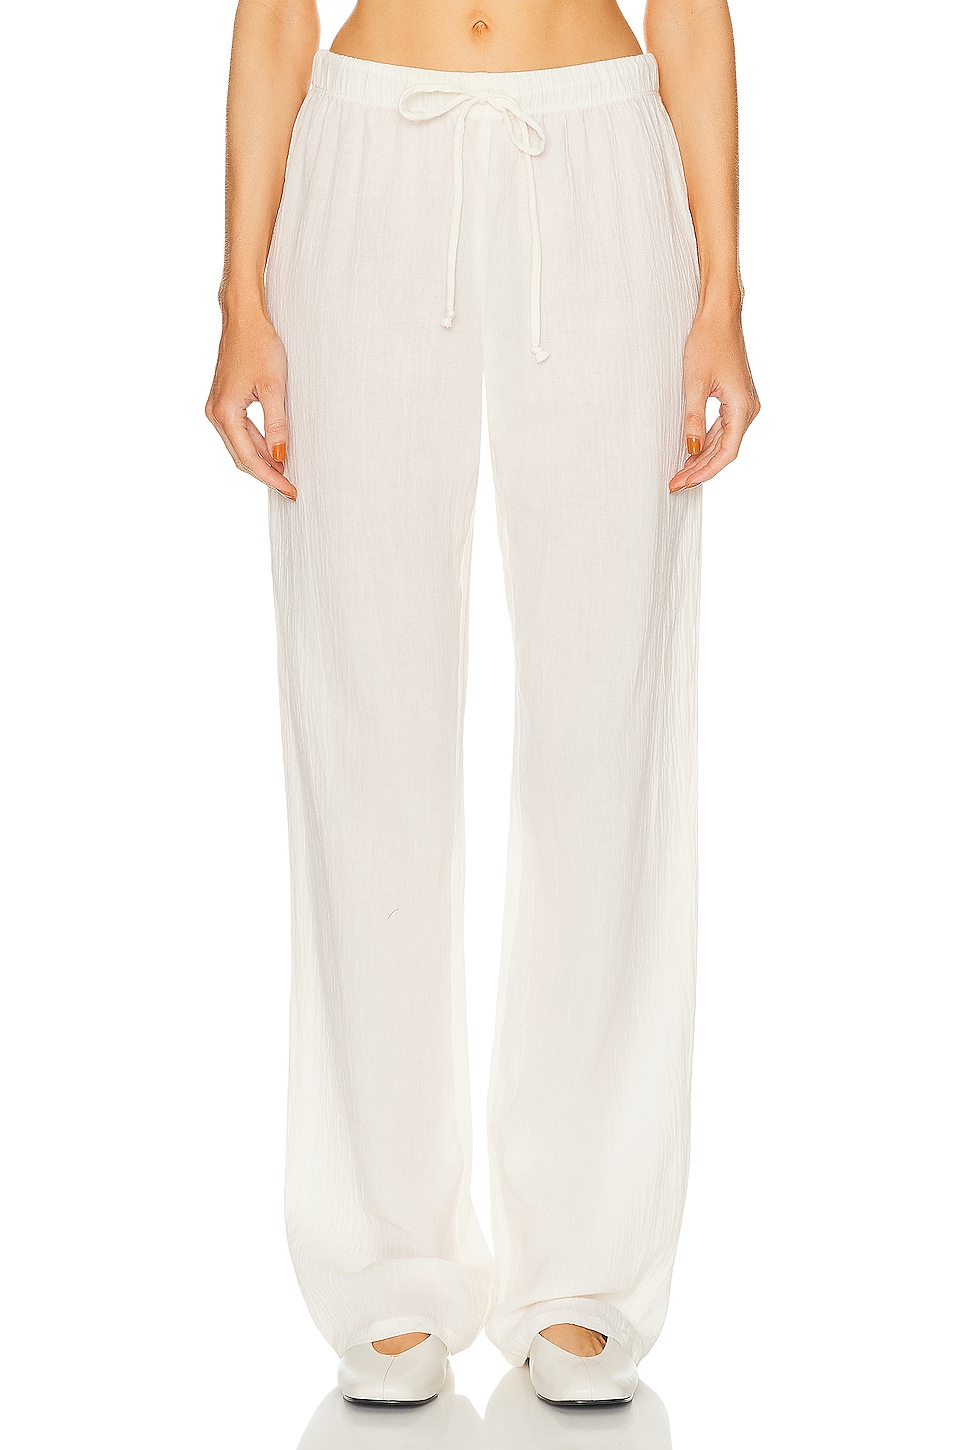 Image 1 of Eterne Willow Pant in Ivory